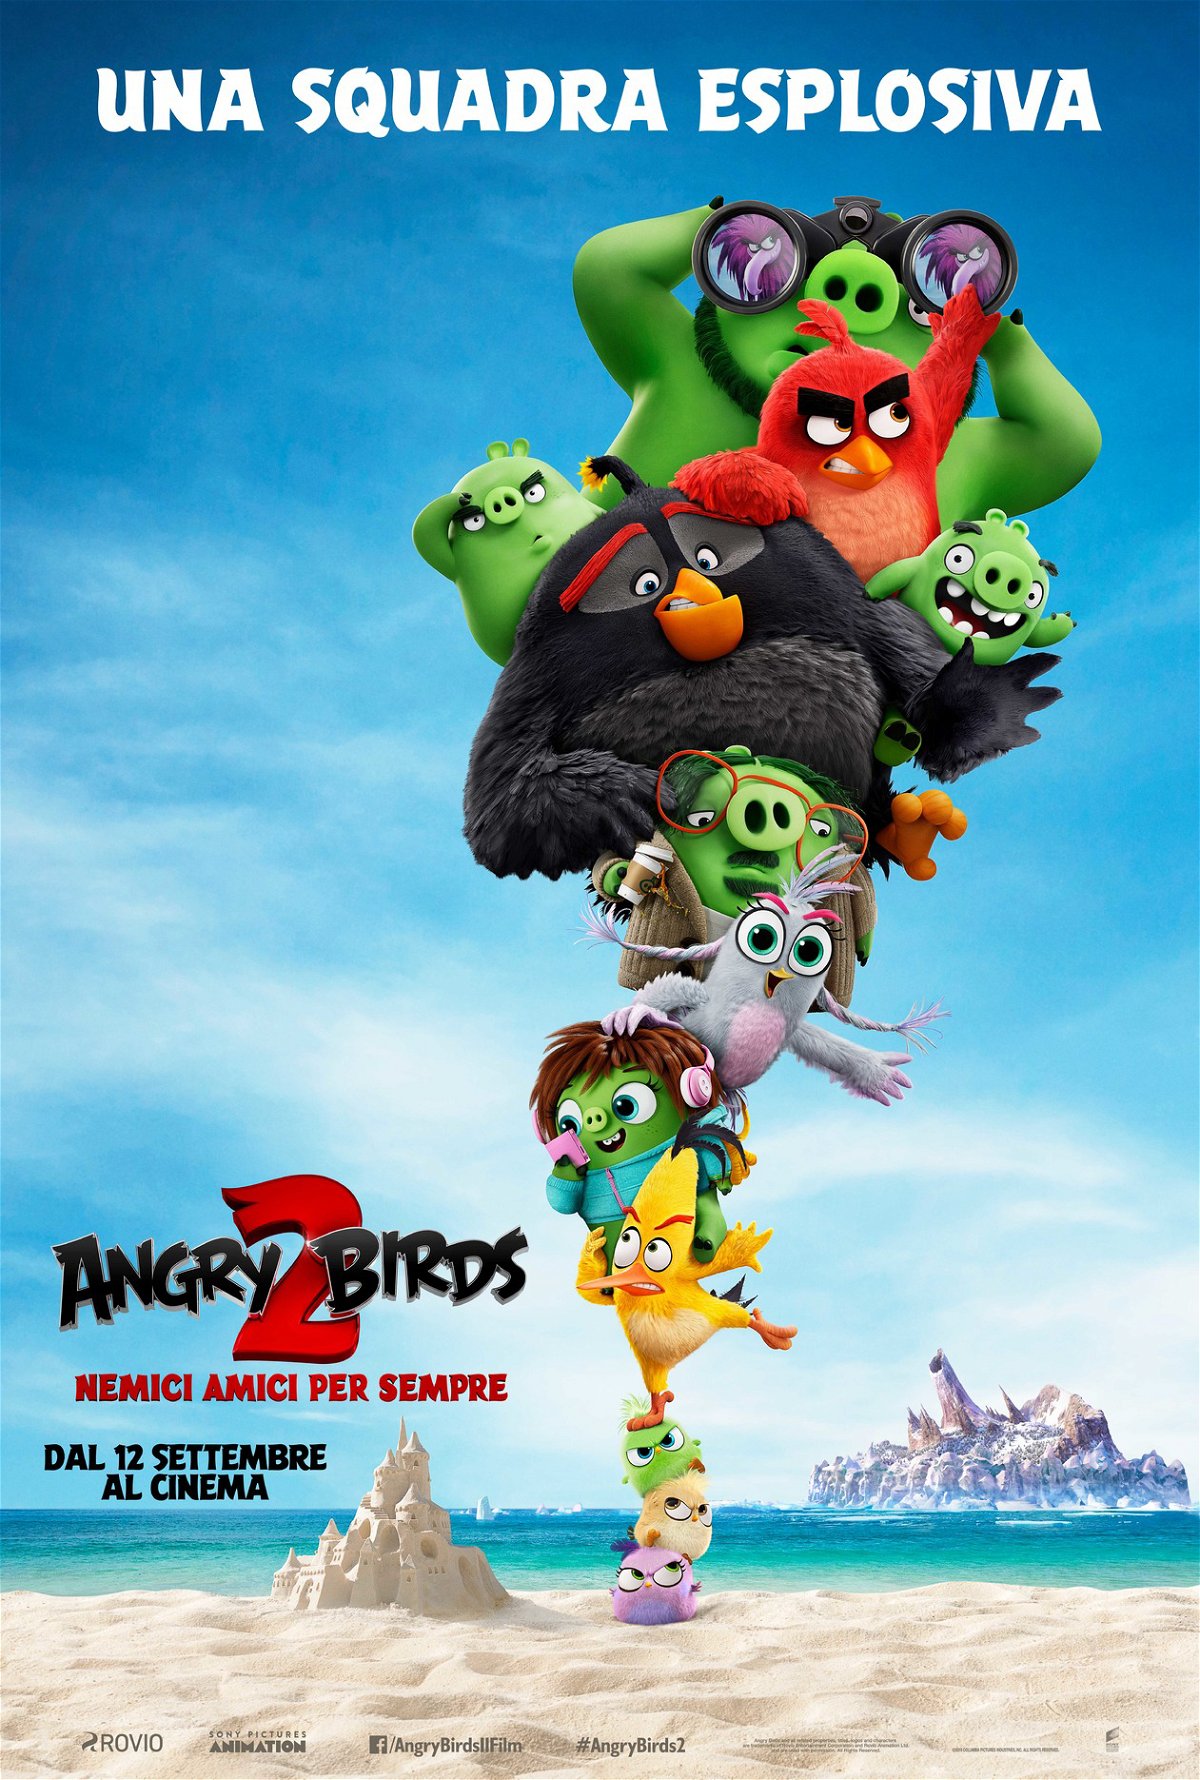 Angry Birds 2 - Nemici amici - il poster